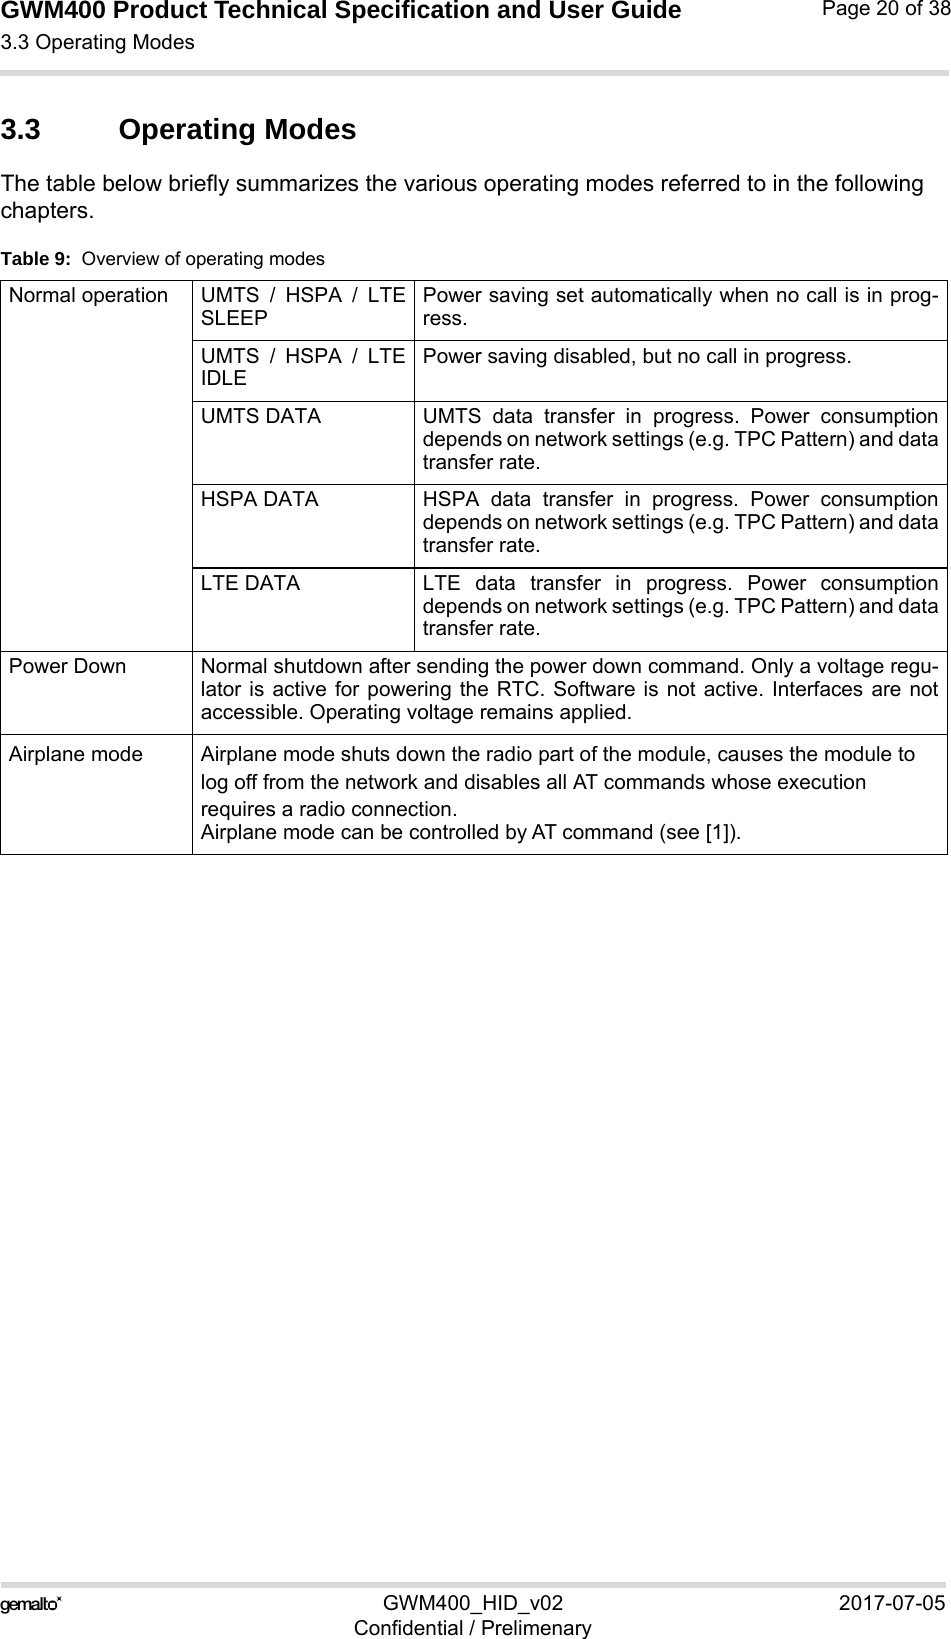 GWM400 Product Technical Specification and User Guide3.3 Operating Modes25GWM400_HID_v02 2017-07-05Confidential / PrelimenaryPage 20 of 383.3 Operating ModesThe table below briefly summarizes the various operating modes referred to in the following chapters. Table 9:  Overview of operating modesNormal operation UMTS / HSPA / LTESLEEPPower saving set automatically when no call is in prog-ress.UMTS / HSPA / LTEIDLEPower saving disabled, but no call in progress.UMTS DATA UMTS  data  transfer  in progress. Power consumptiondepends on network settings (e.g. TPC Pattern) and datatransfer rate.HSPA DATA HSPA data transfer in progress. Power consumptiondepends on network settings (e.g. TPC Pattern) and datatransfer rate.LTE DATA LTE data transfer in progress. Power consumptiondepends on network settings (e.g. TPC Pattern) and datatransfer rate.Power Down Normal shutdown after sending the power down command. Only a voltage regu-lator is active for powering the RTC. Software is not active. Interfaces are notaccessible. Operating voltage remains applied.Airplane mode Airplane mode shuts down the radio part of the module, causes the module to log off from the network and disables all AT commands whose execution requires a radio connection.Airplane mode can be controlled by AT command (see [1]).